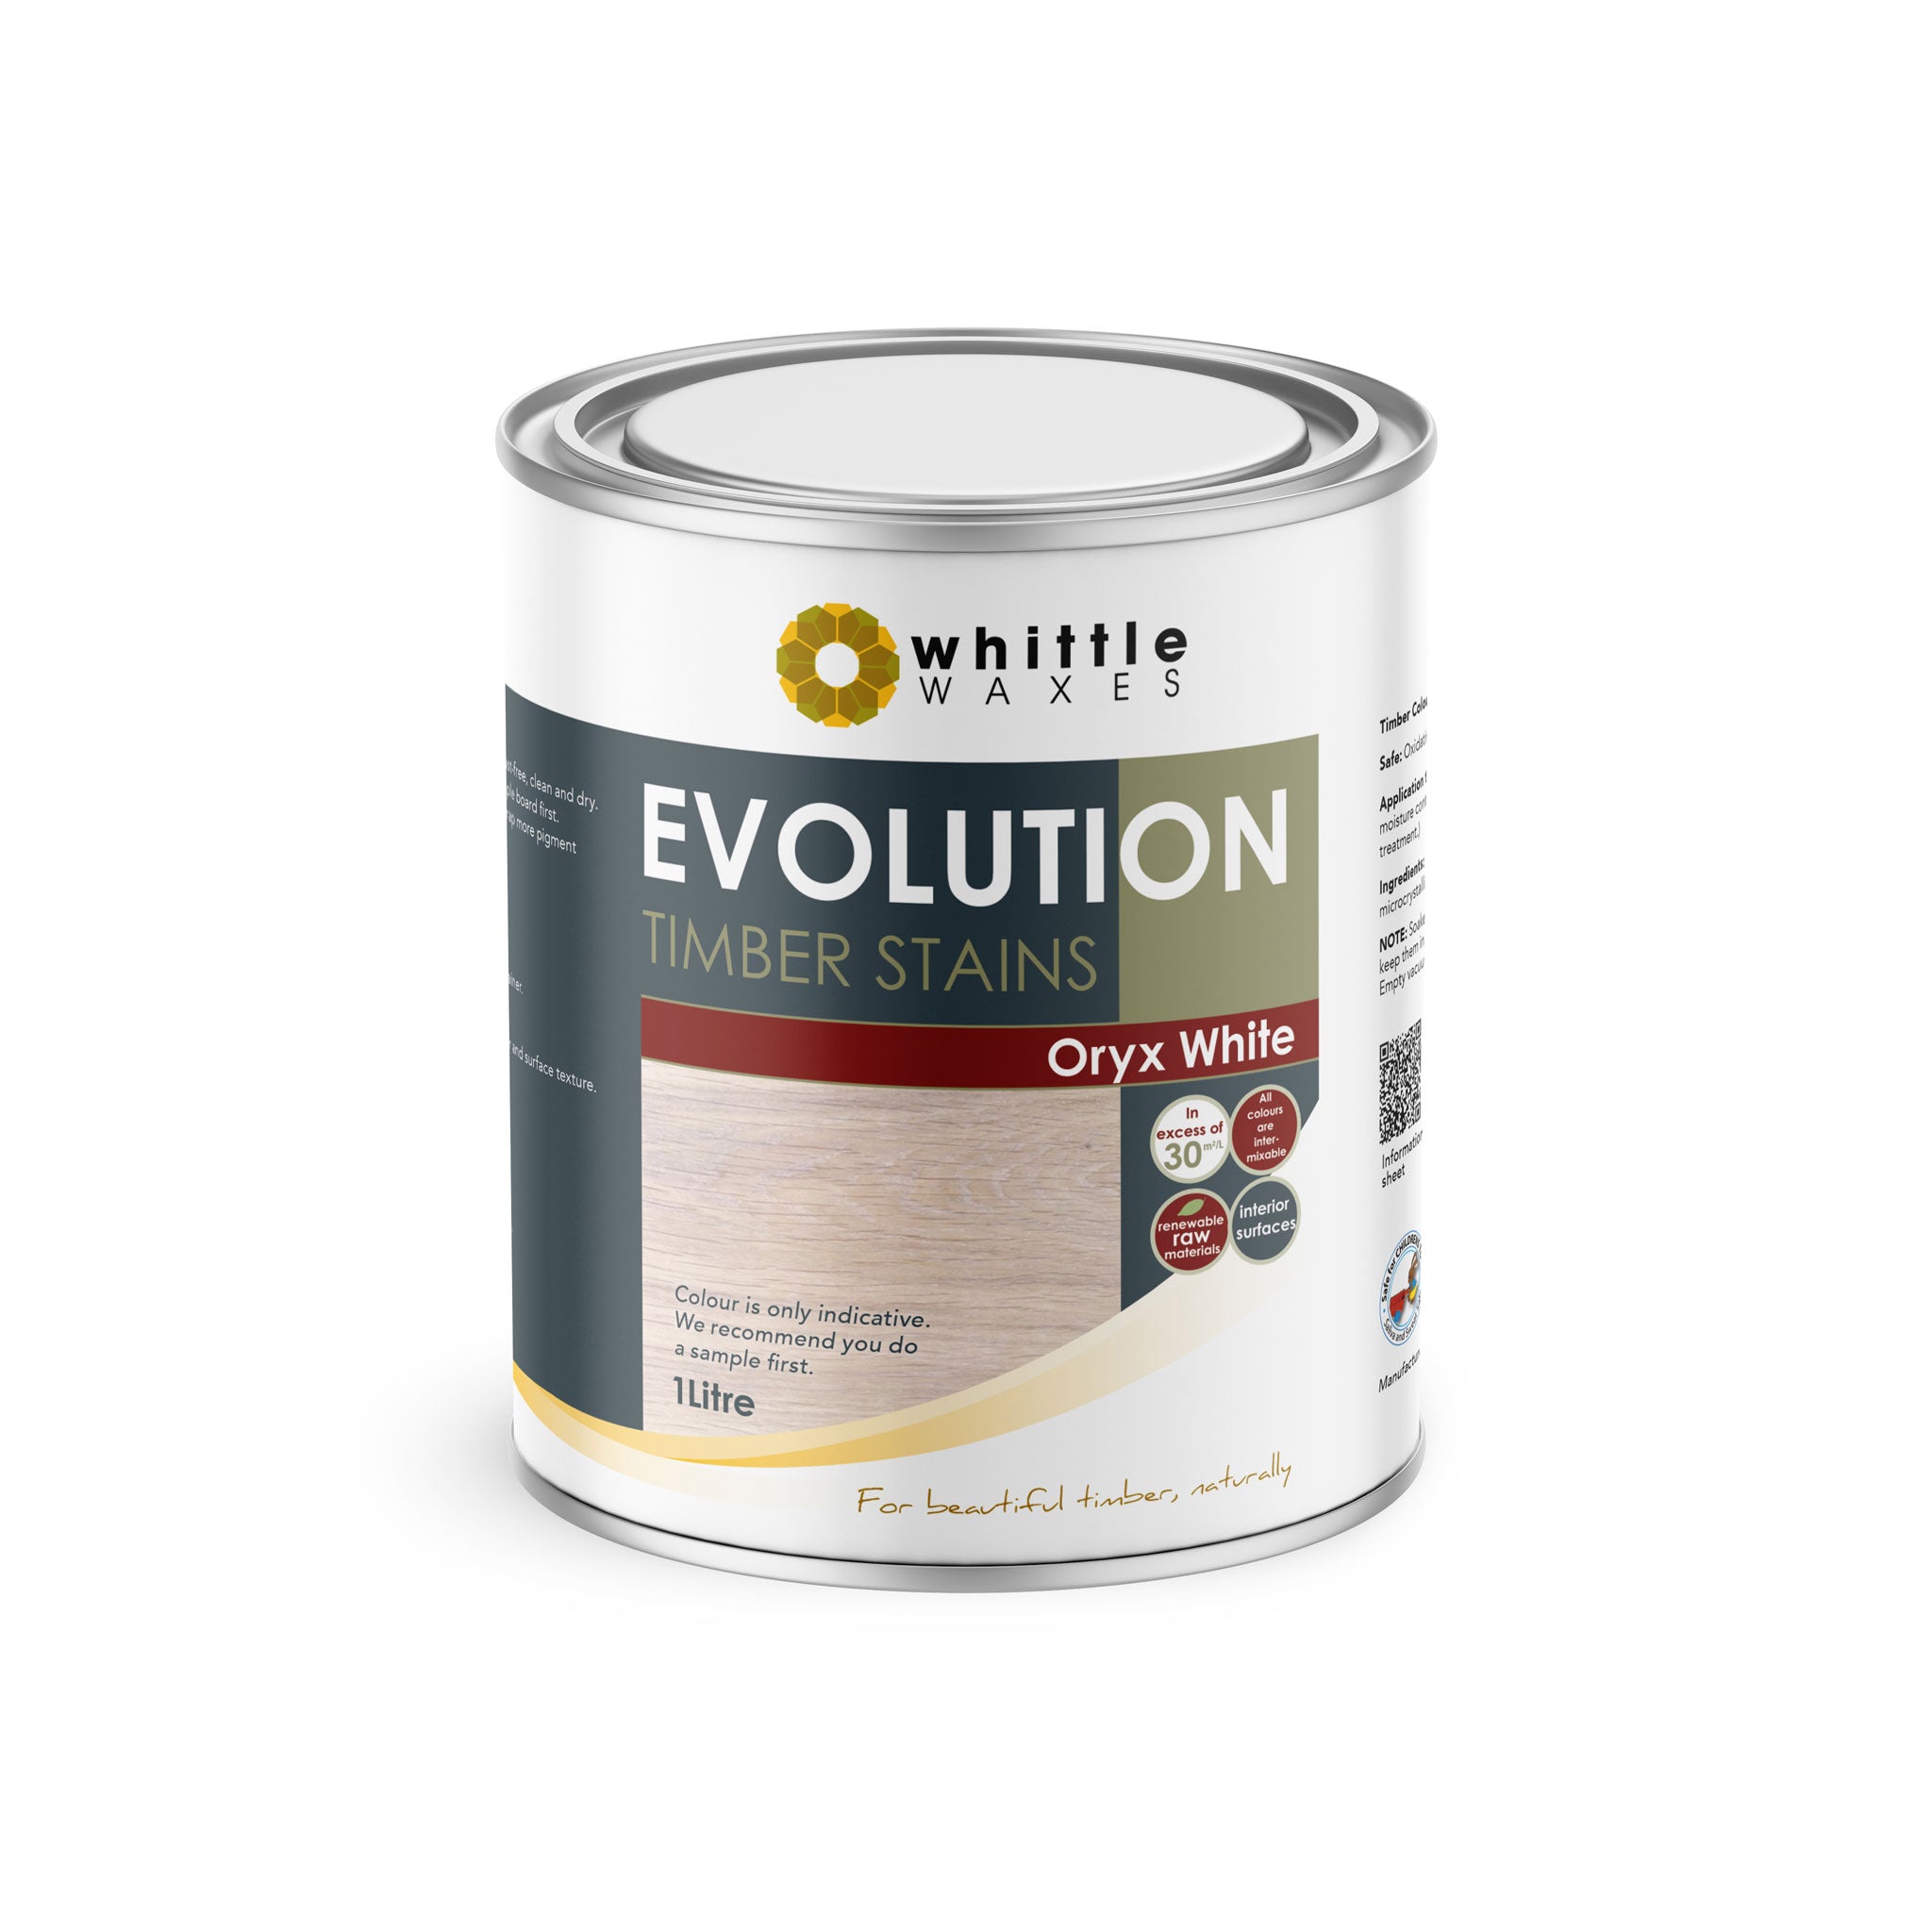 Whittle Waxes Evolution Colours (Oryx White) - quality timber stain - 1 Litre